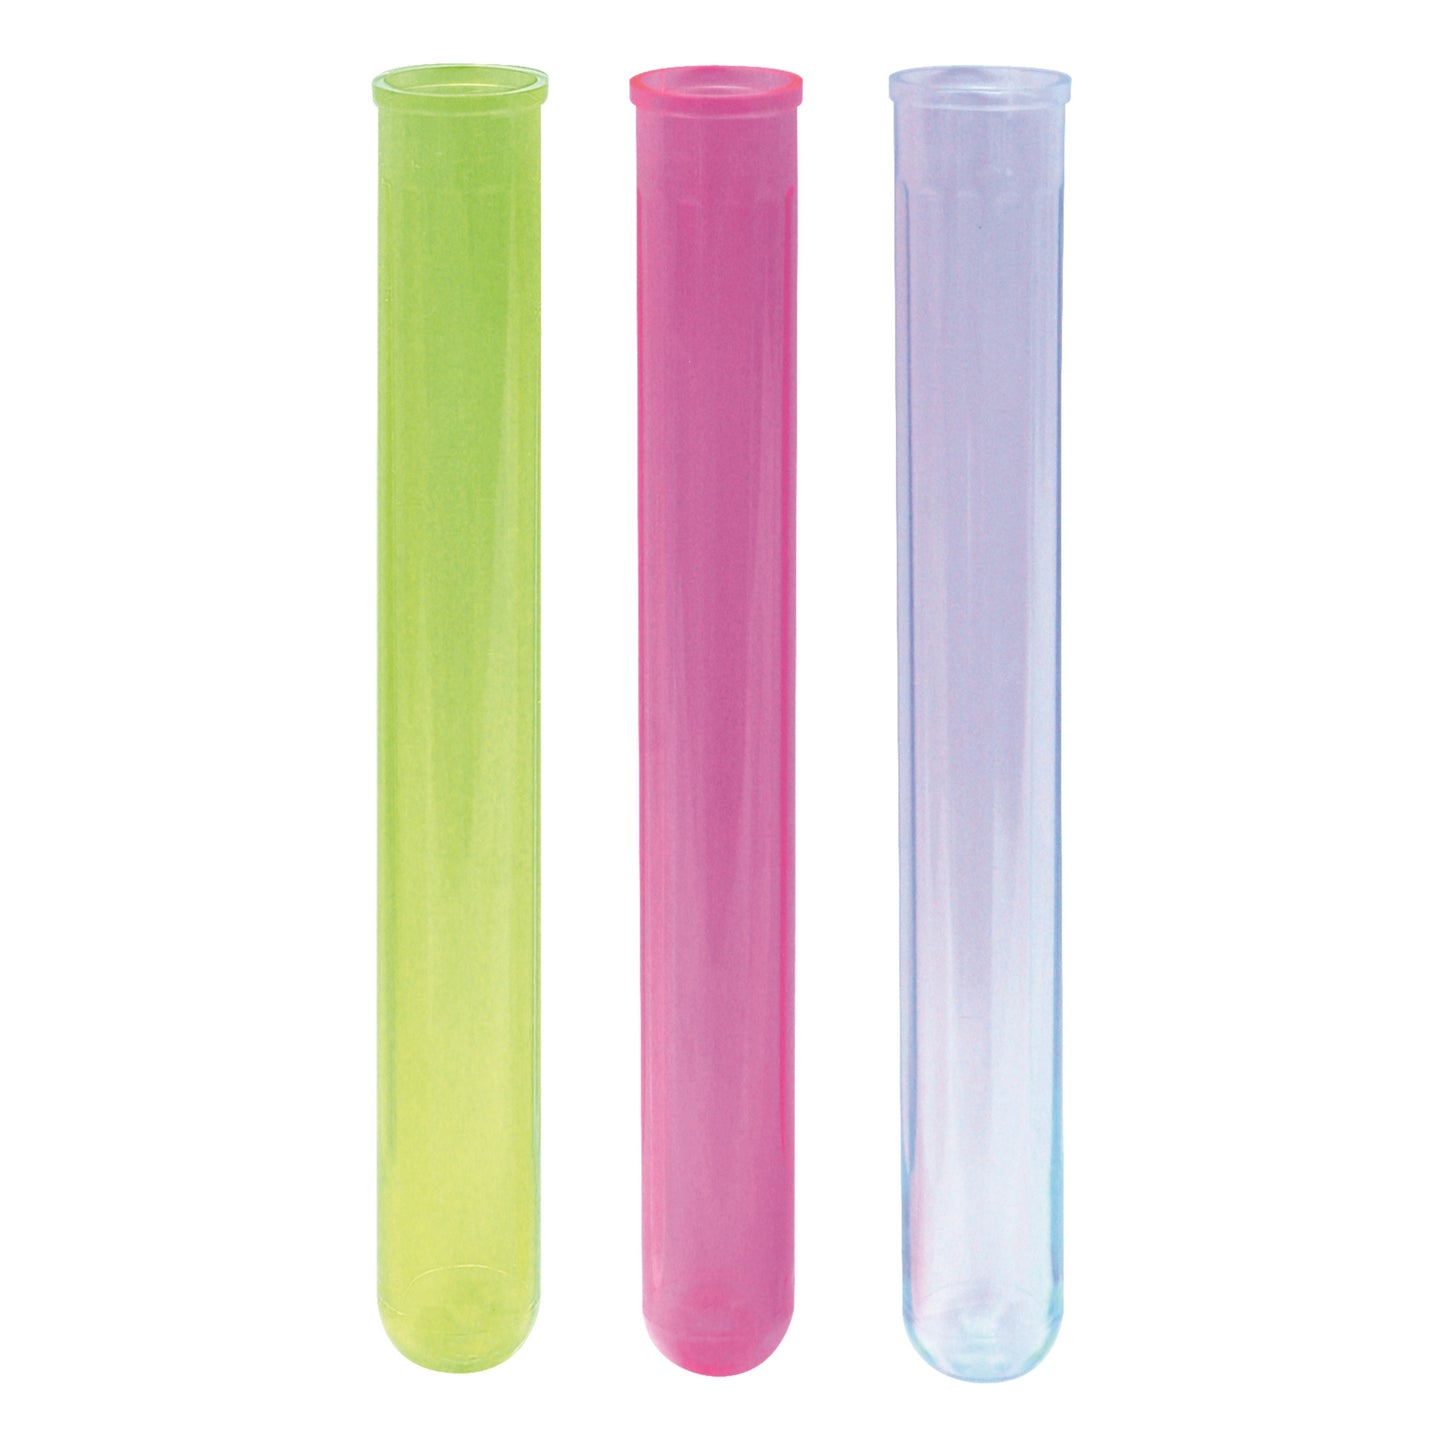 CR-1620AC - Bar Maid Shooter Tubes, Assorted Neon, 100 Pieces/Pack